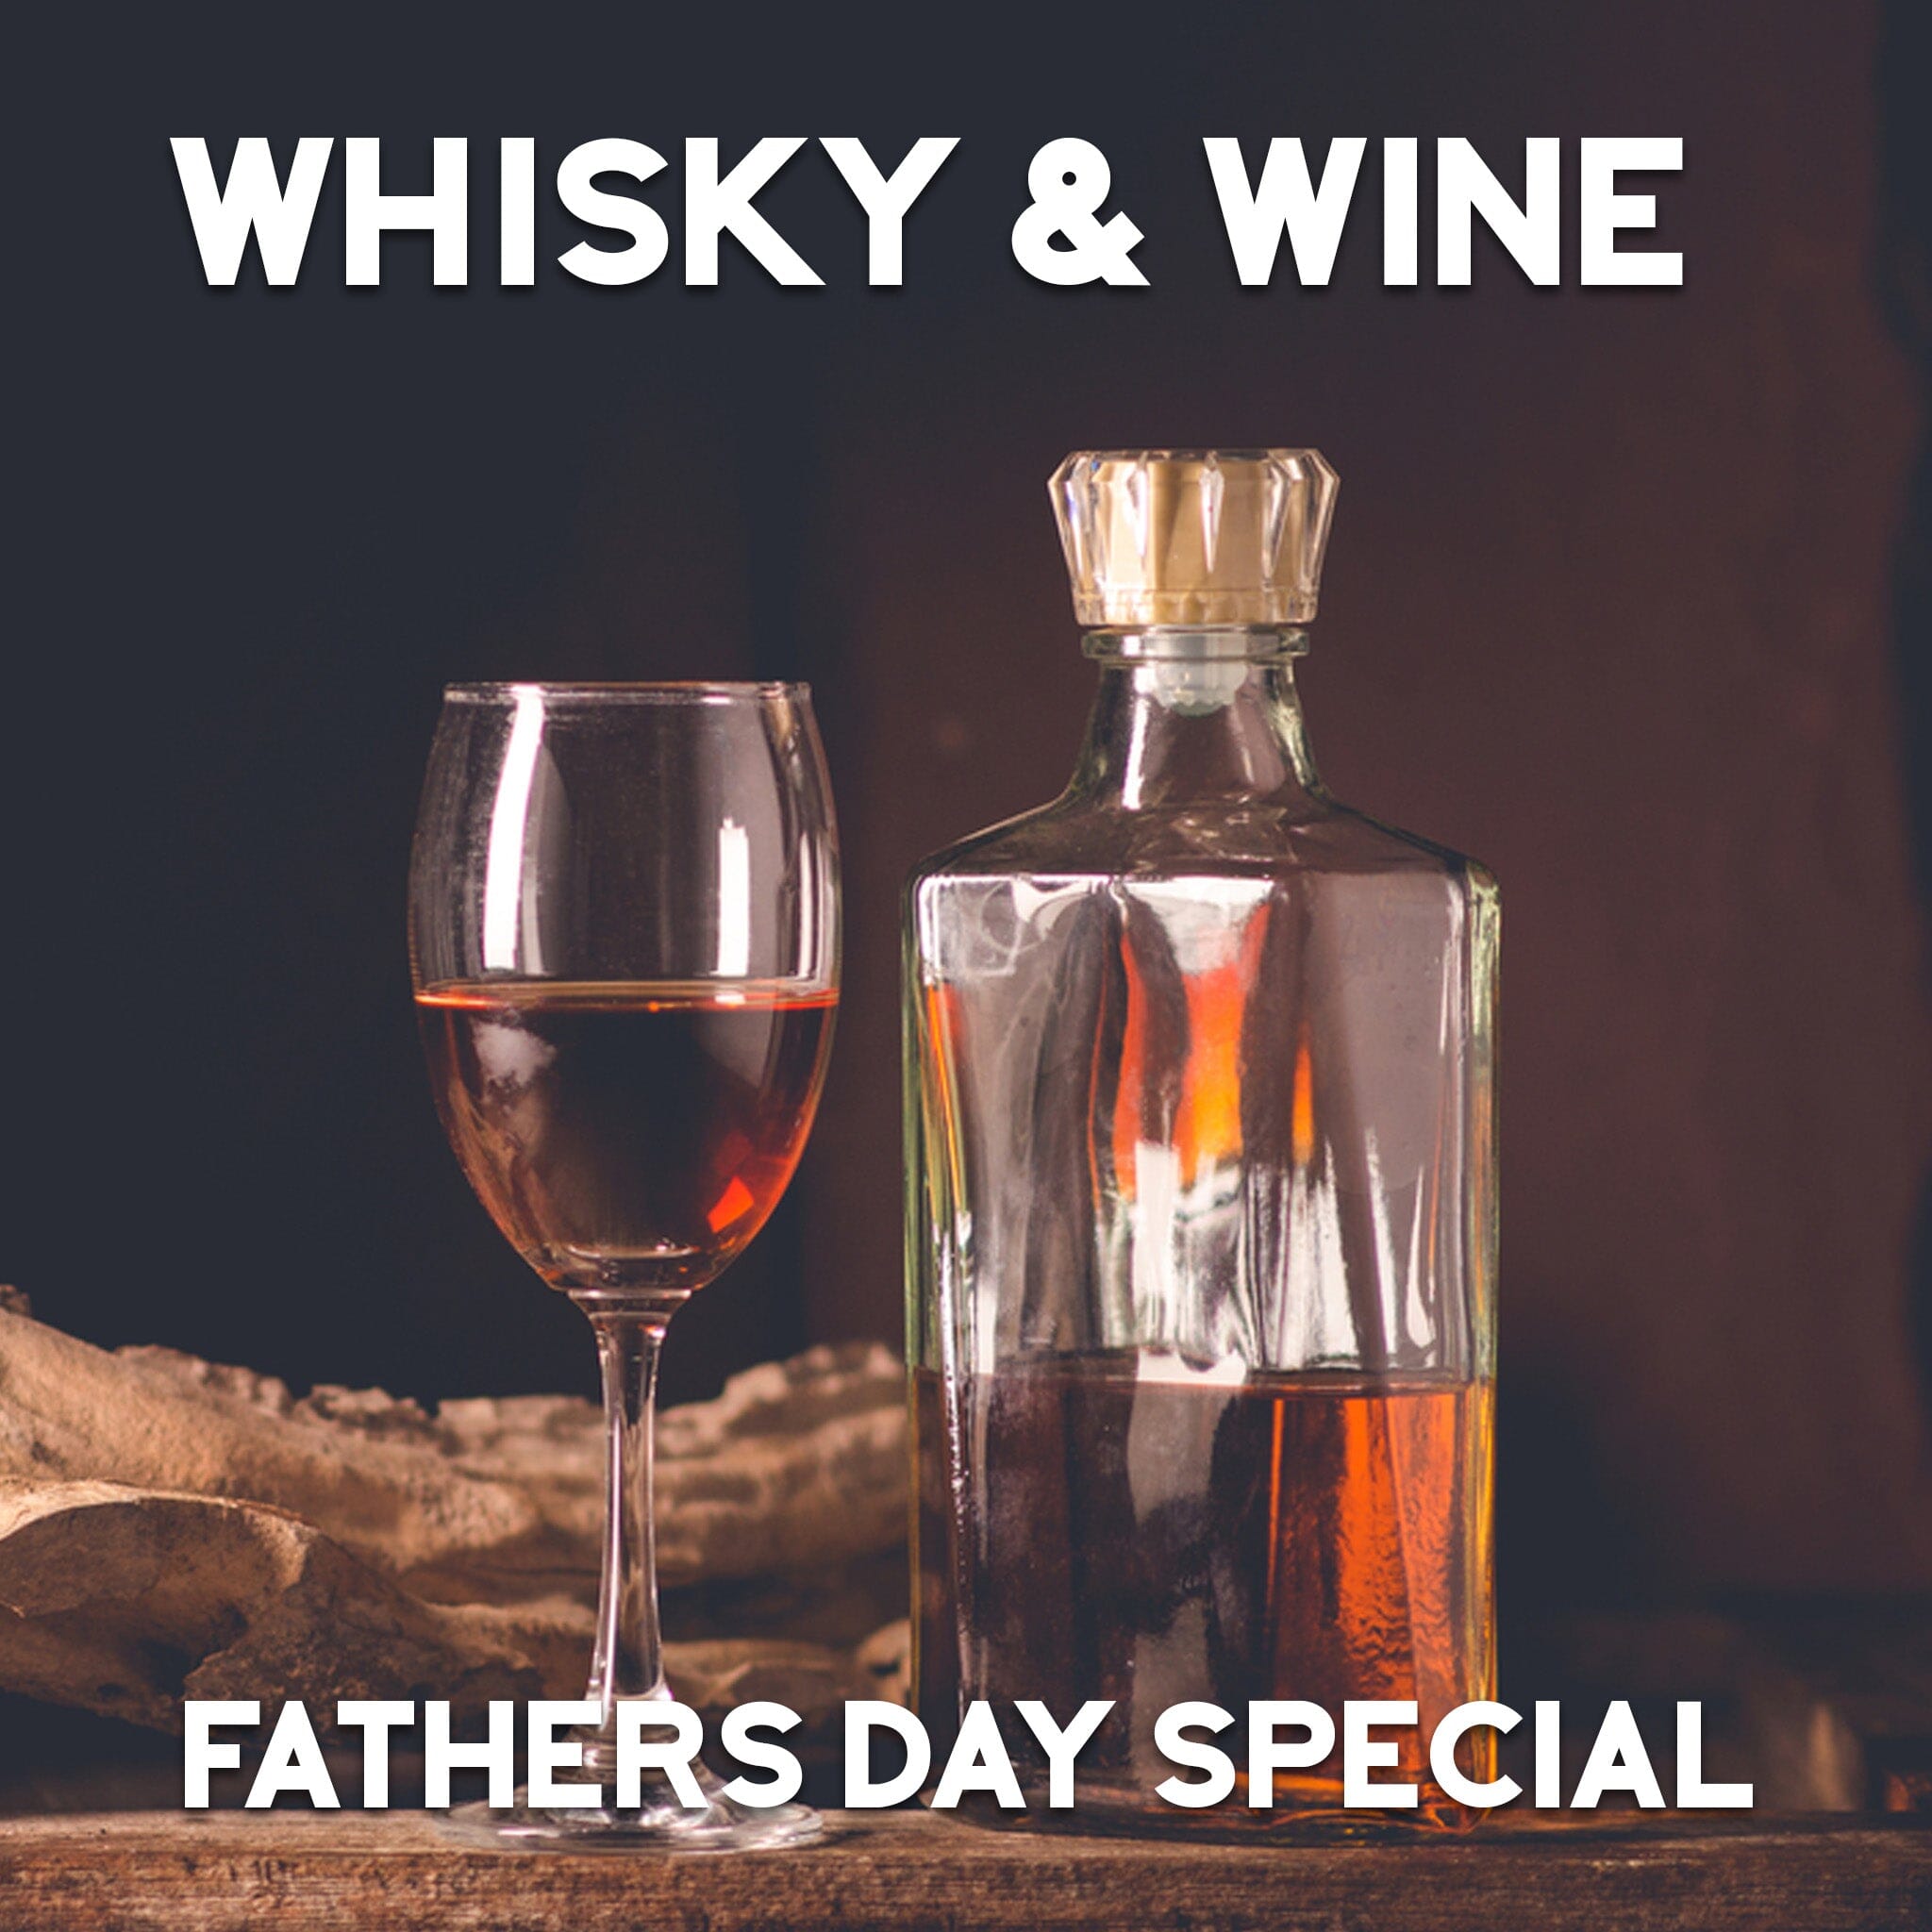 Whisky & Wine: Fathers' Day Tasting Experience Tasting pack The Online Wine Tasting Club 